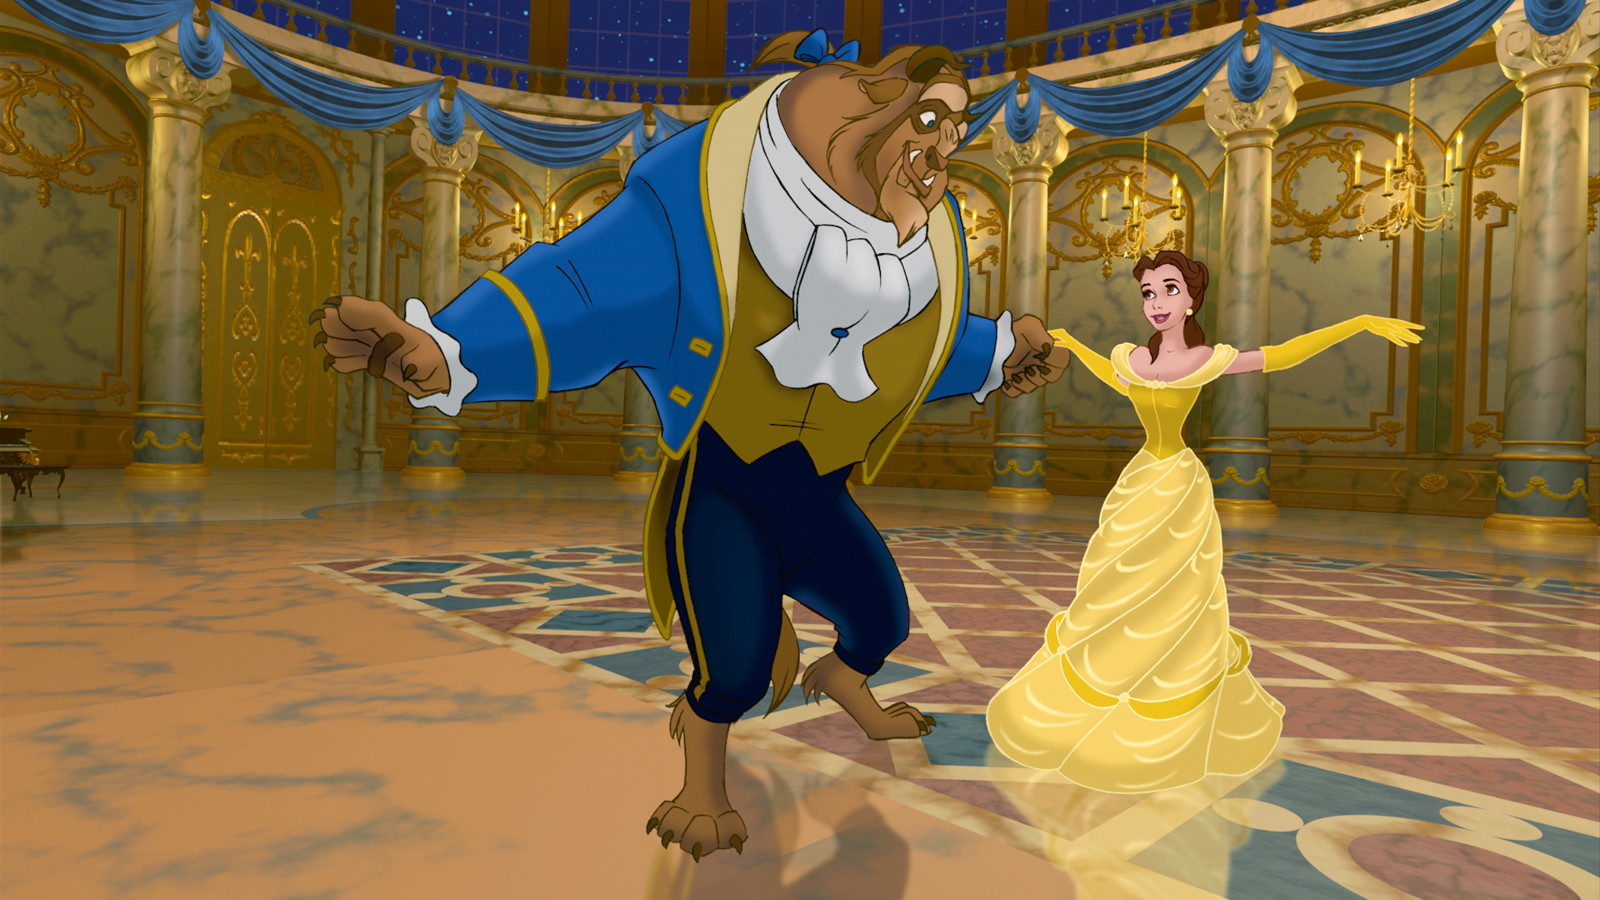 Beauty And The Beast How The Tale As Old As Time Became A Cultural Icon Laughingplace Com